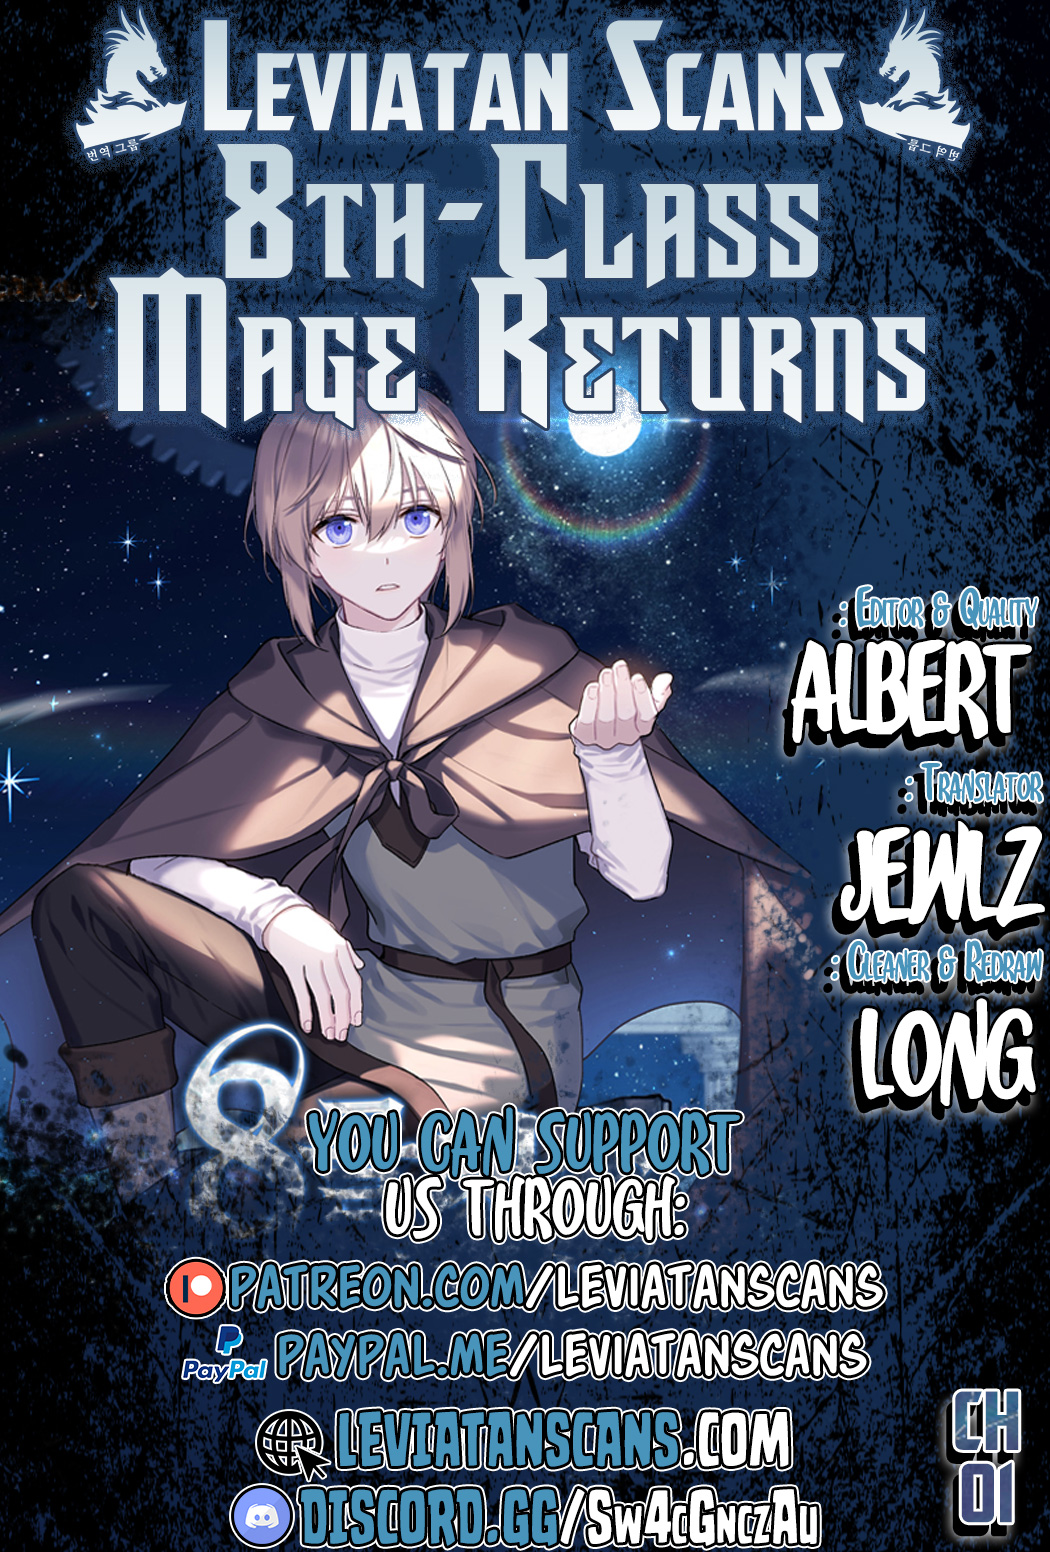 Return of the 8th Class Magician - Chapter 7120 - Image 1